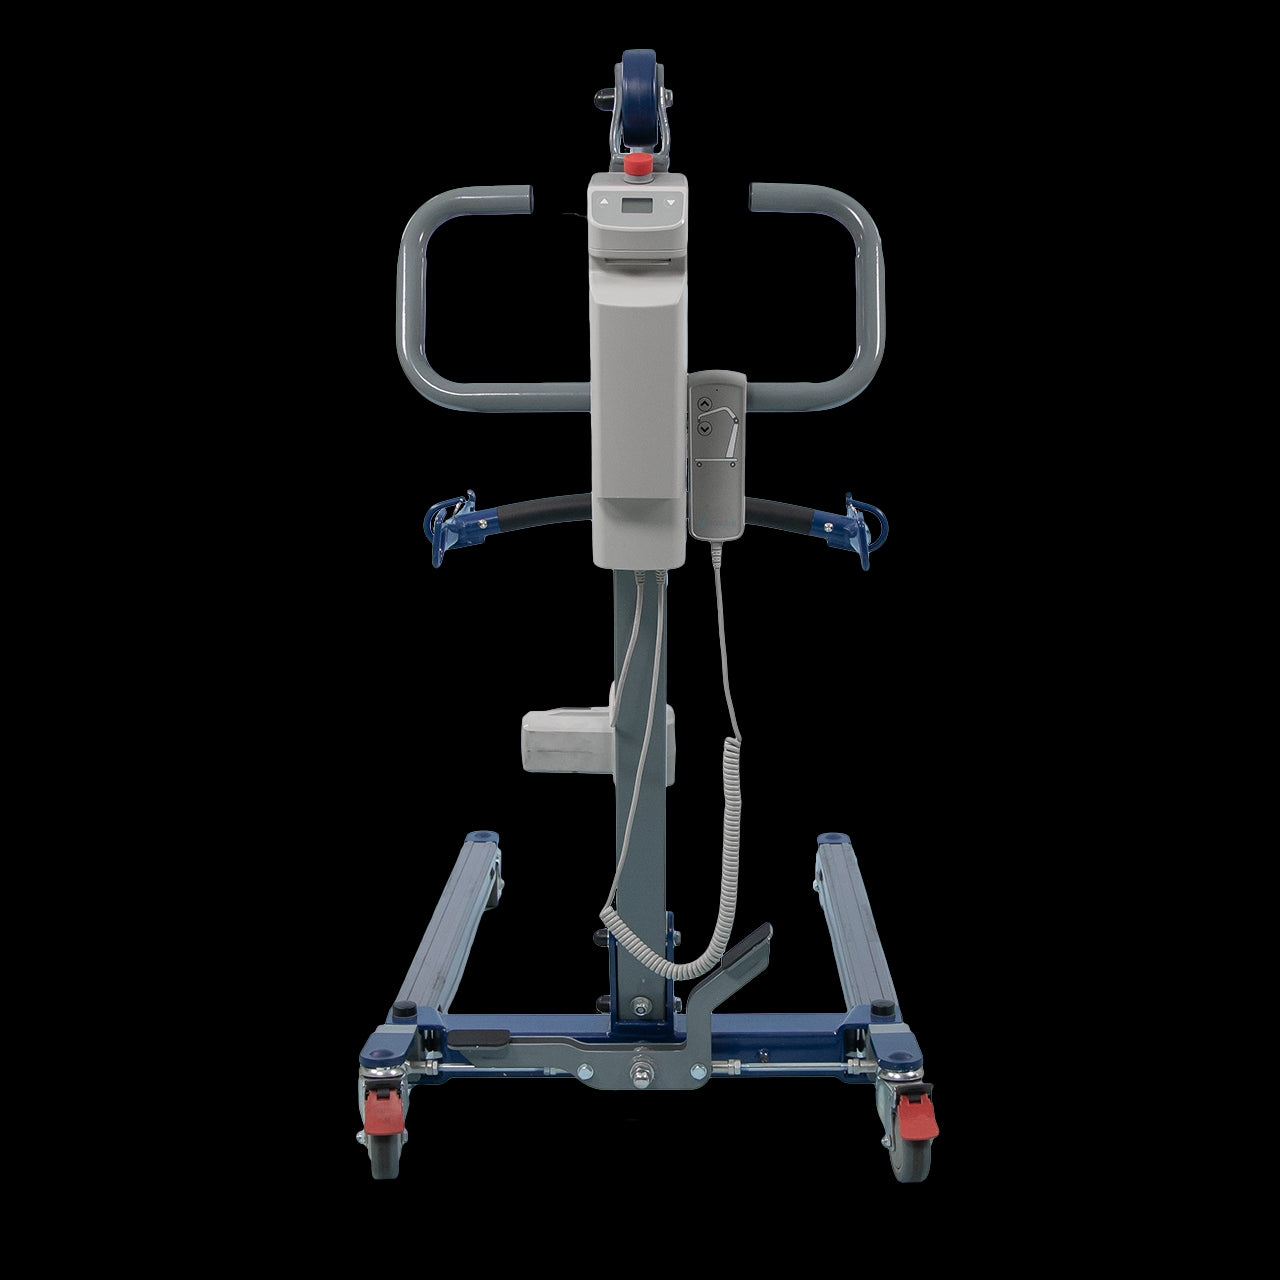 Proactive Medical Protekt 600 Electric Patient Lift (600 lb. Capacity)-My Perfect Scooter